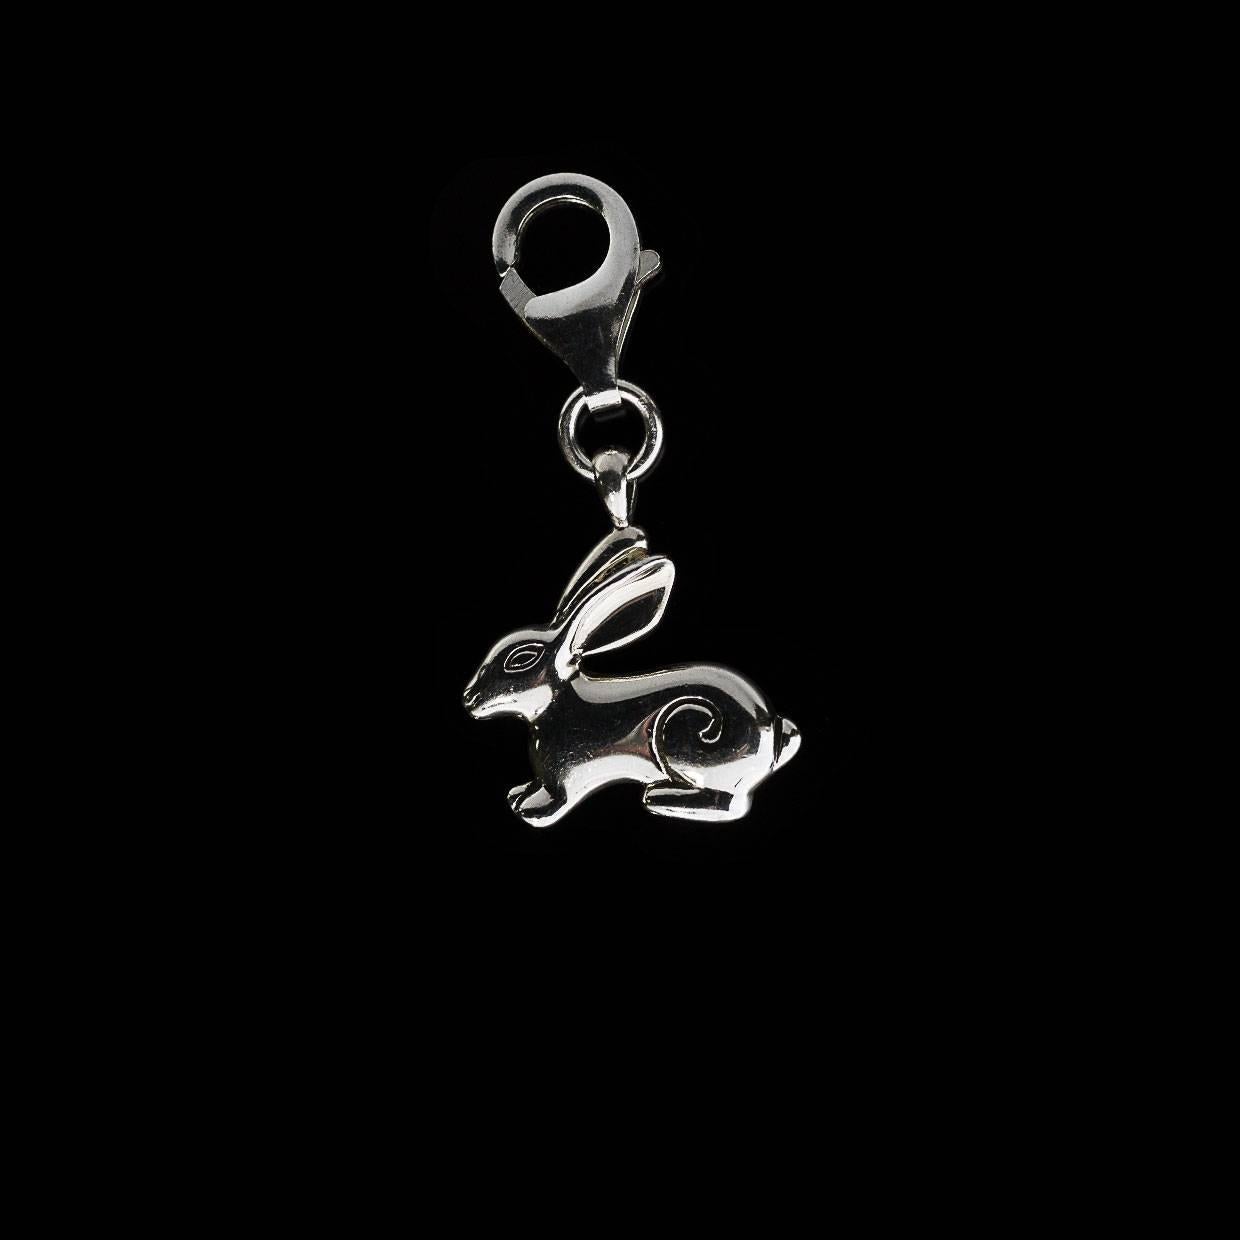 Each piece of John Hardy jewelry has been crafted in Bali since 1975. John Hardy is dedicated to creating timeless one-of-a-kind pieces that are brilliantly alive.

This sterling silver rabbit charm is from John Hardy's Chinese Zodiac collection.